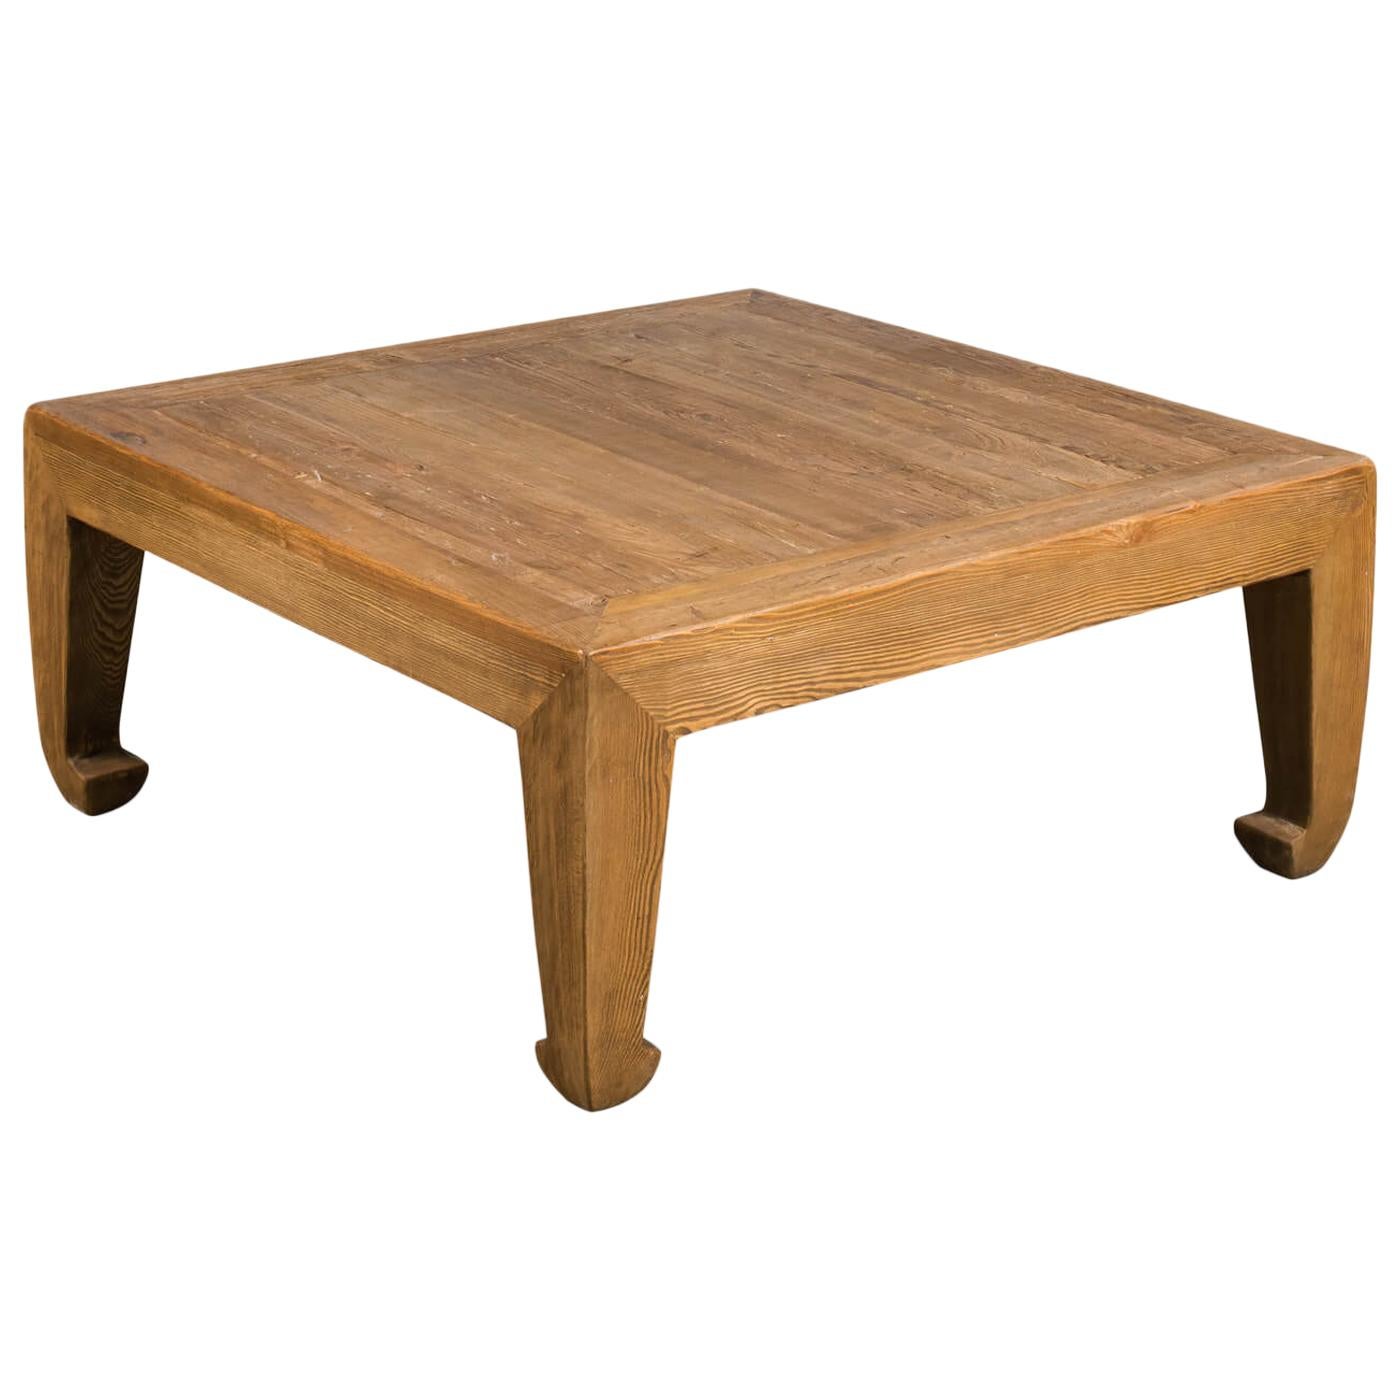 Modern Asian-Style Square Coffee Table